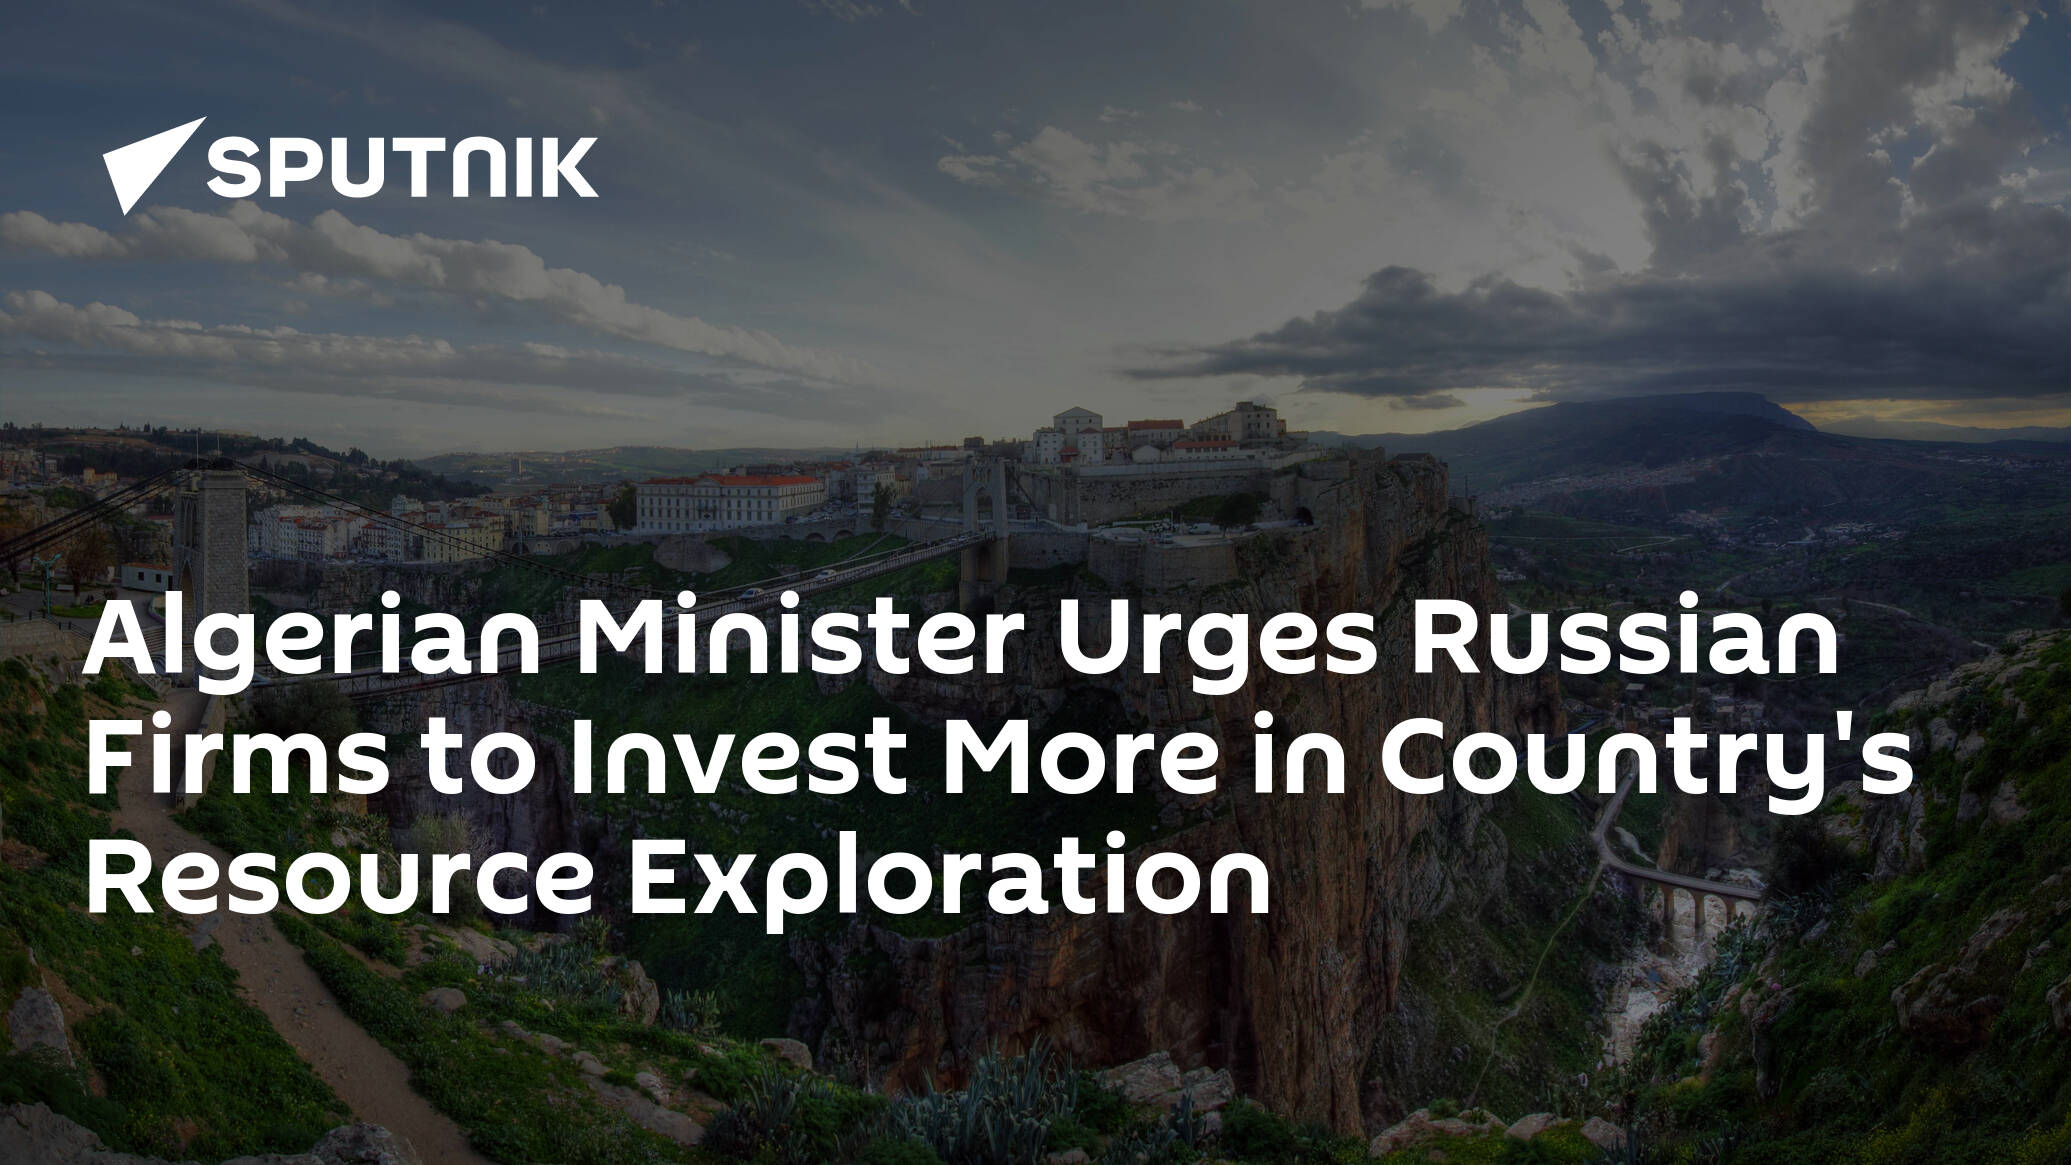 Algerian Minister Urges Russian Firms to Invest More in Country's Resource Exploration